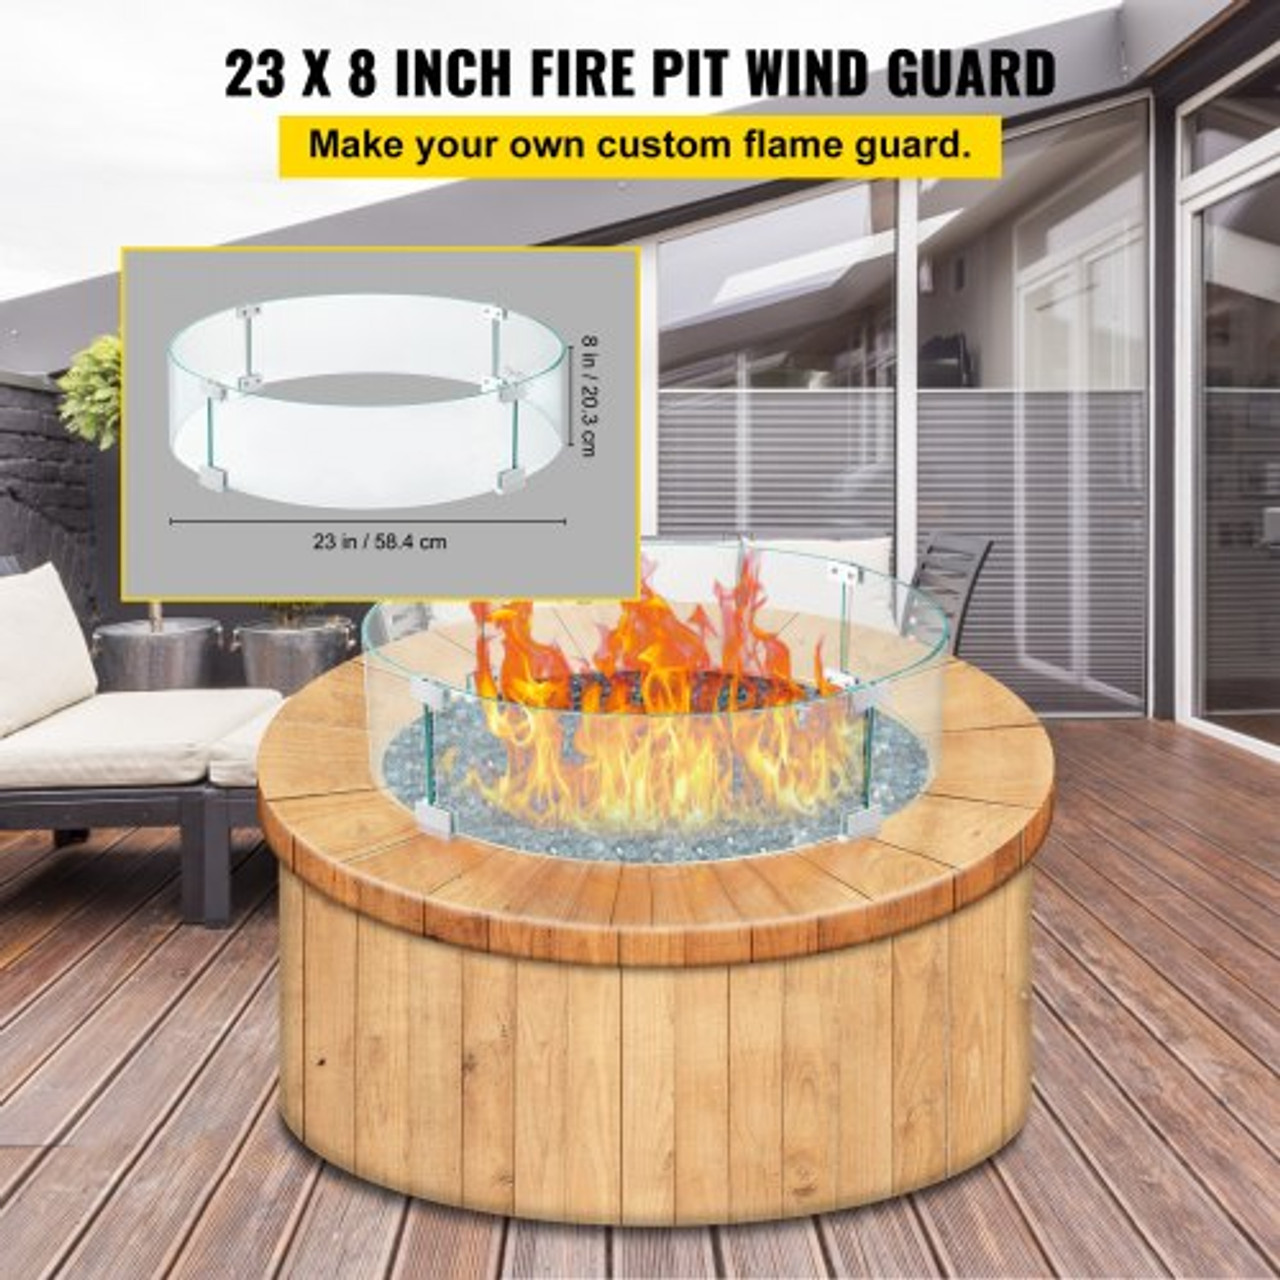 Fire Pit Wind Guard, 23 x 23 x 8 Inch Glass Flame Guard, Round Glass Shield, 1/4-Inch Thick Fire Table, Clear Tempered Glass Flame Guard, Aluminum Alloy Feet for Propane, Gas, Outdoor